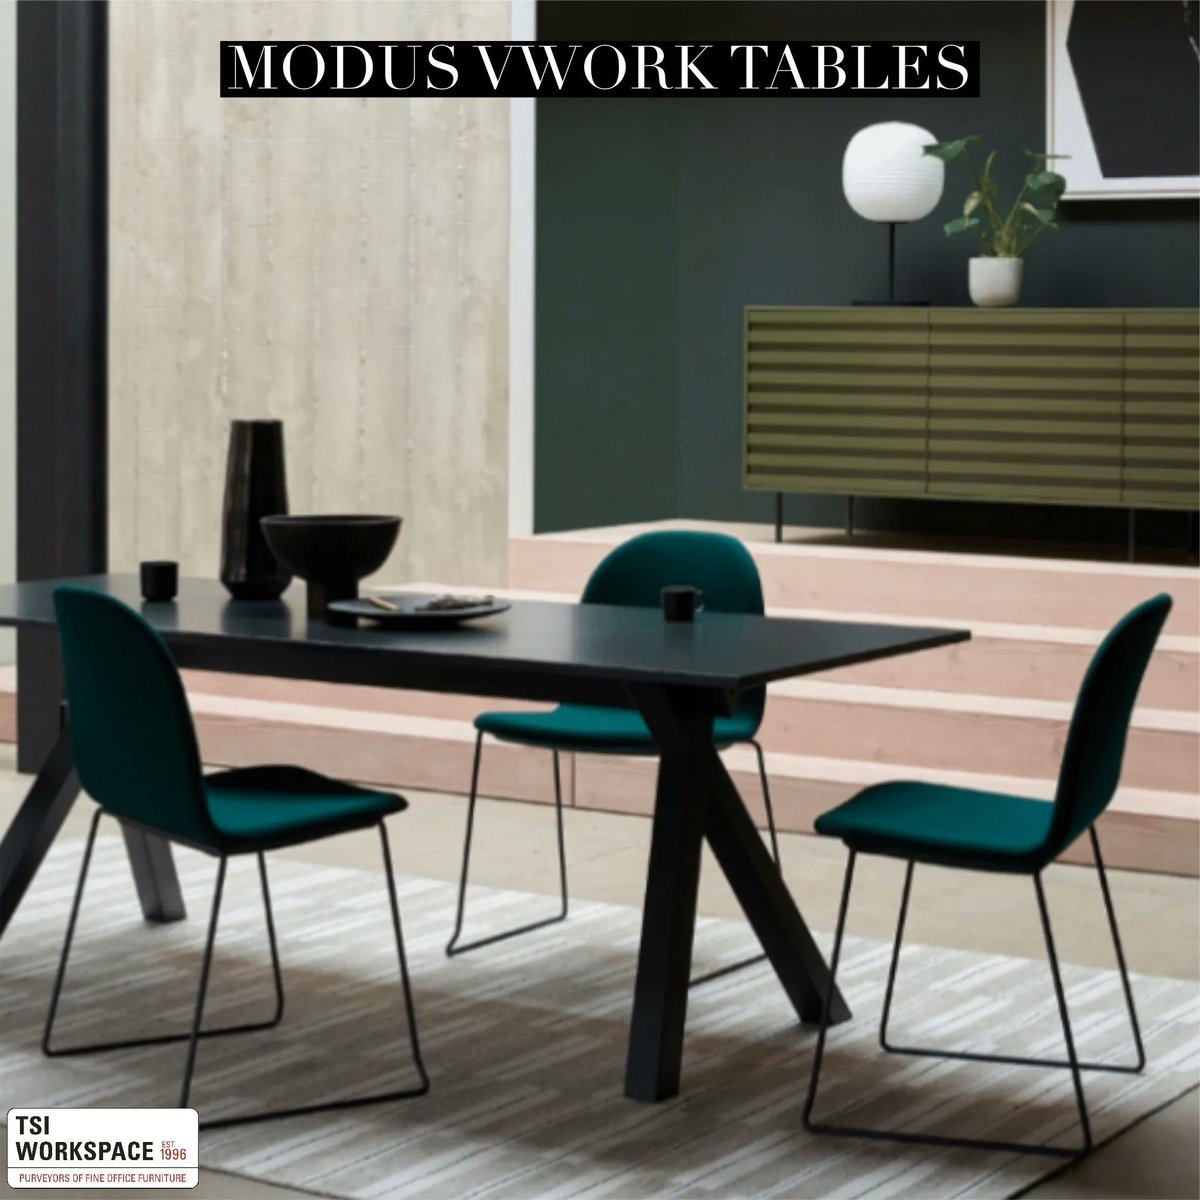 Modus VWork Tables

Modus VWork Tables, named after its distinctive V-shaped joinery, was born from parent product VTable. Sold as standalone

bit.ly/2l34jz3

#furniture #commercialfurniture #designerfurniture